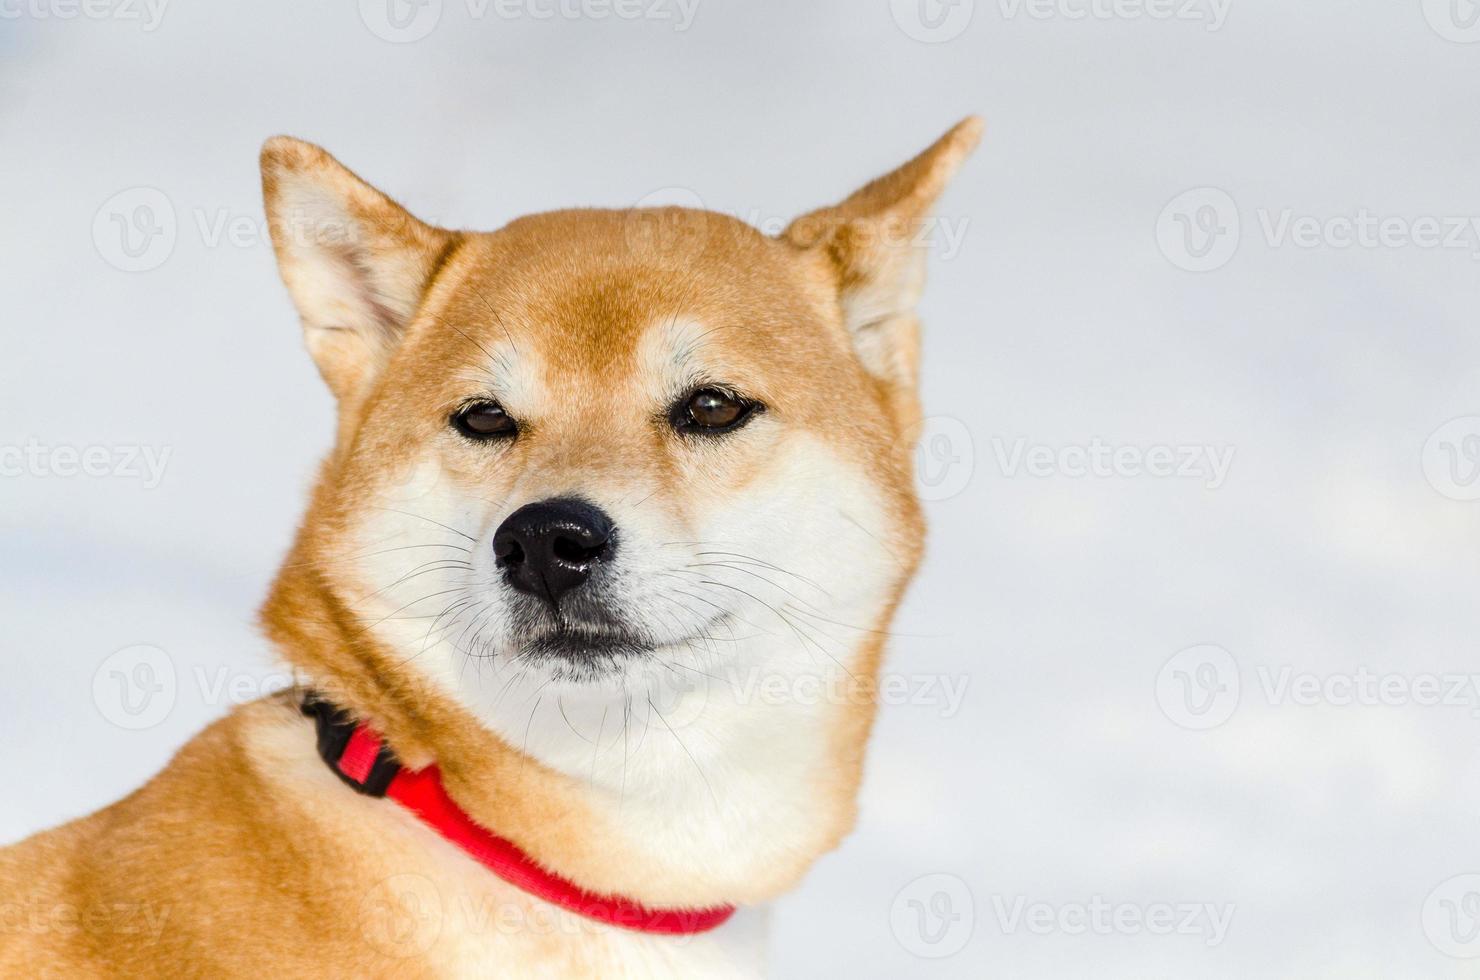 Akita dog, close up face portrait, snow background. Funny cute dog snout, copy space. Fluffy soft fur. photo